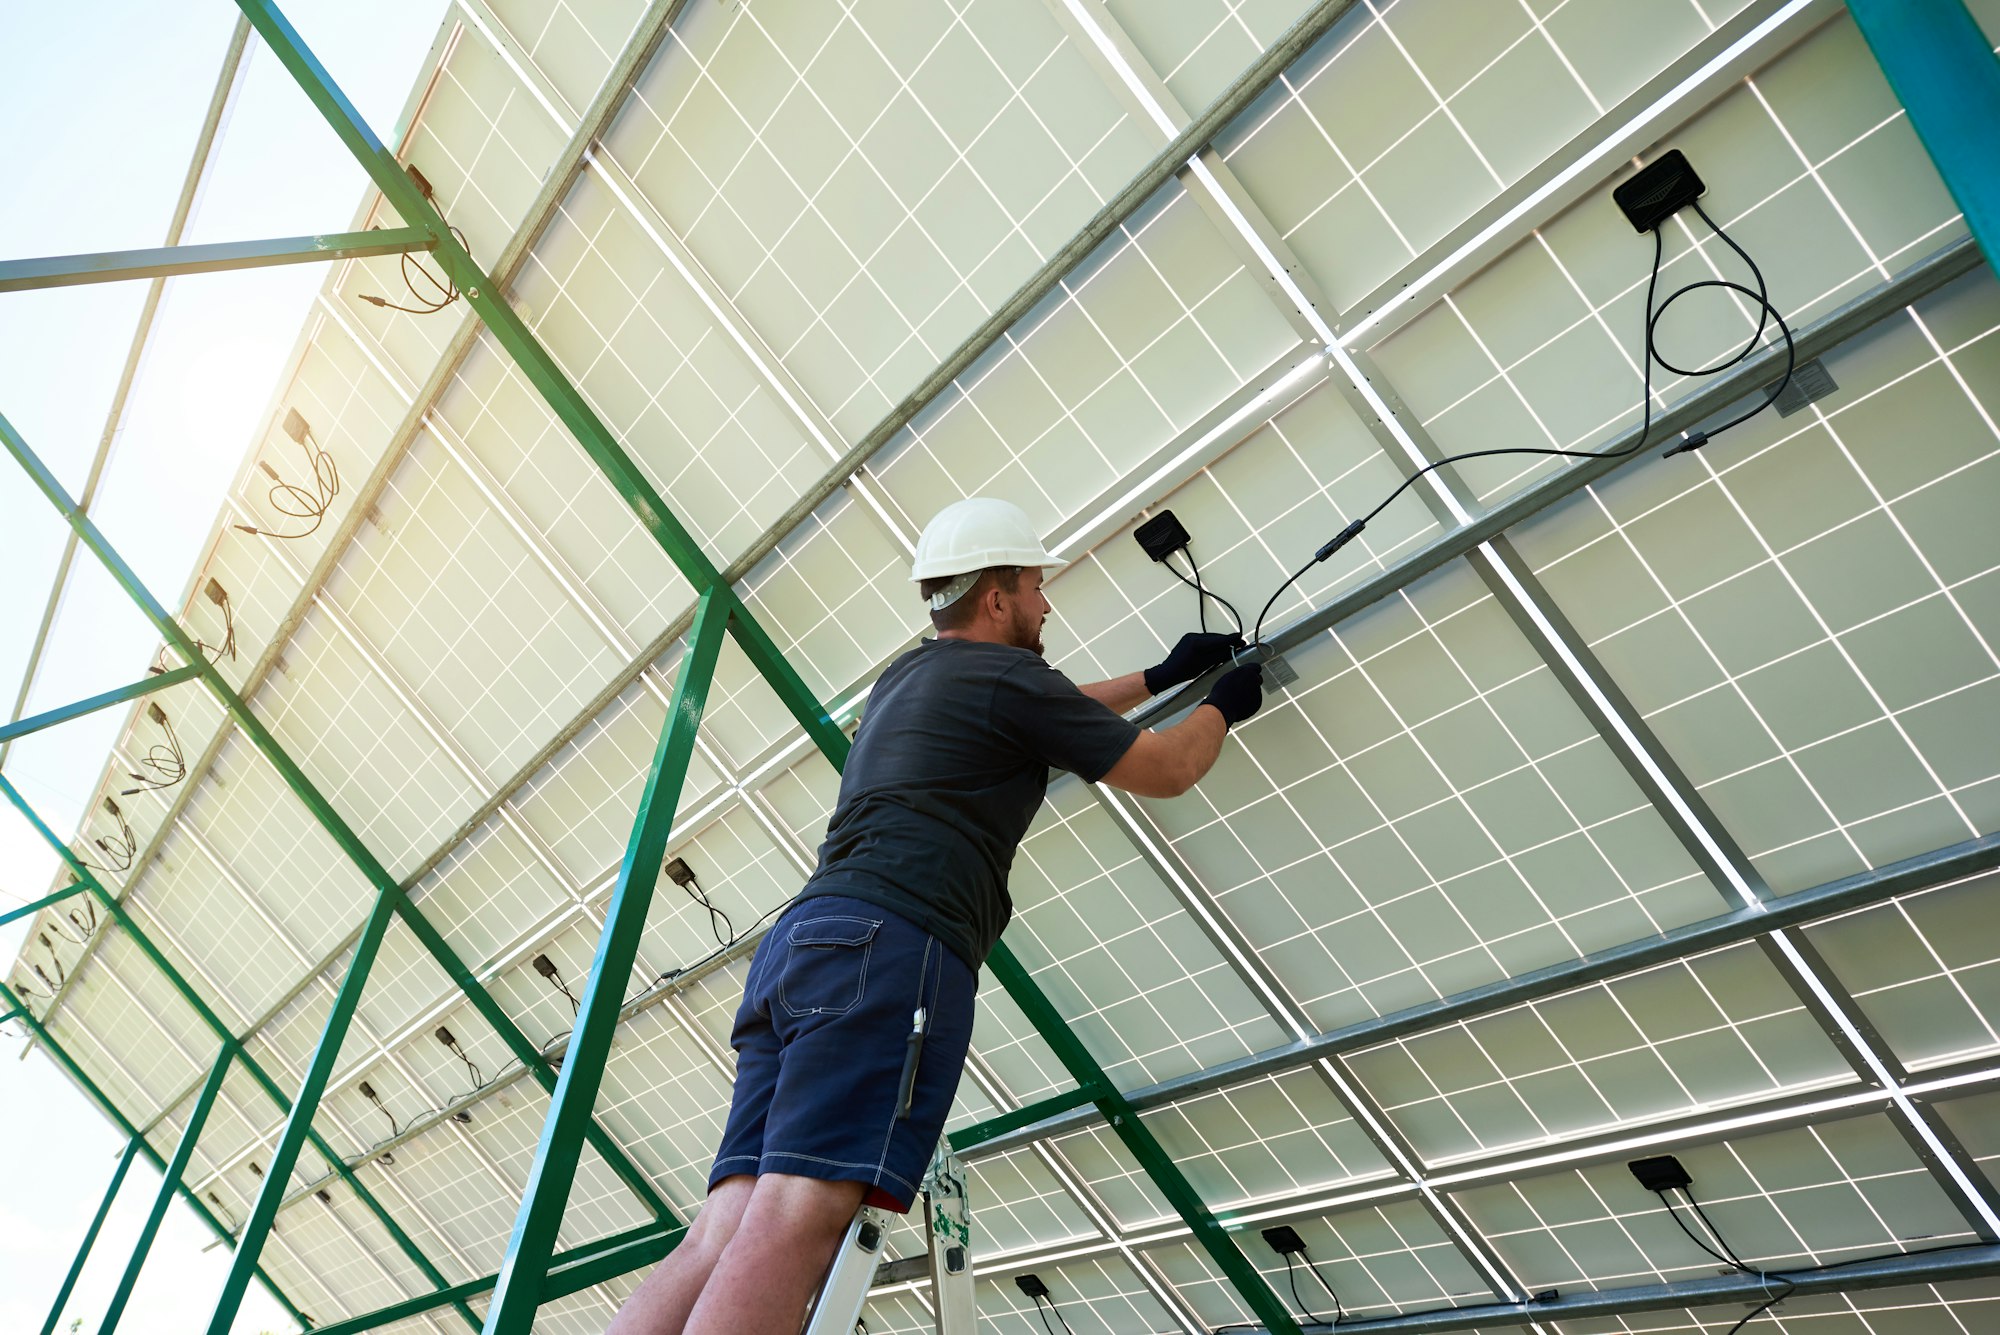 Professional worker installing solar panels on the green metal construction